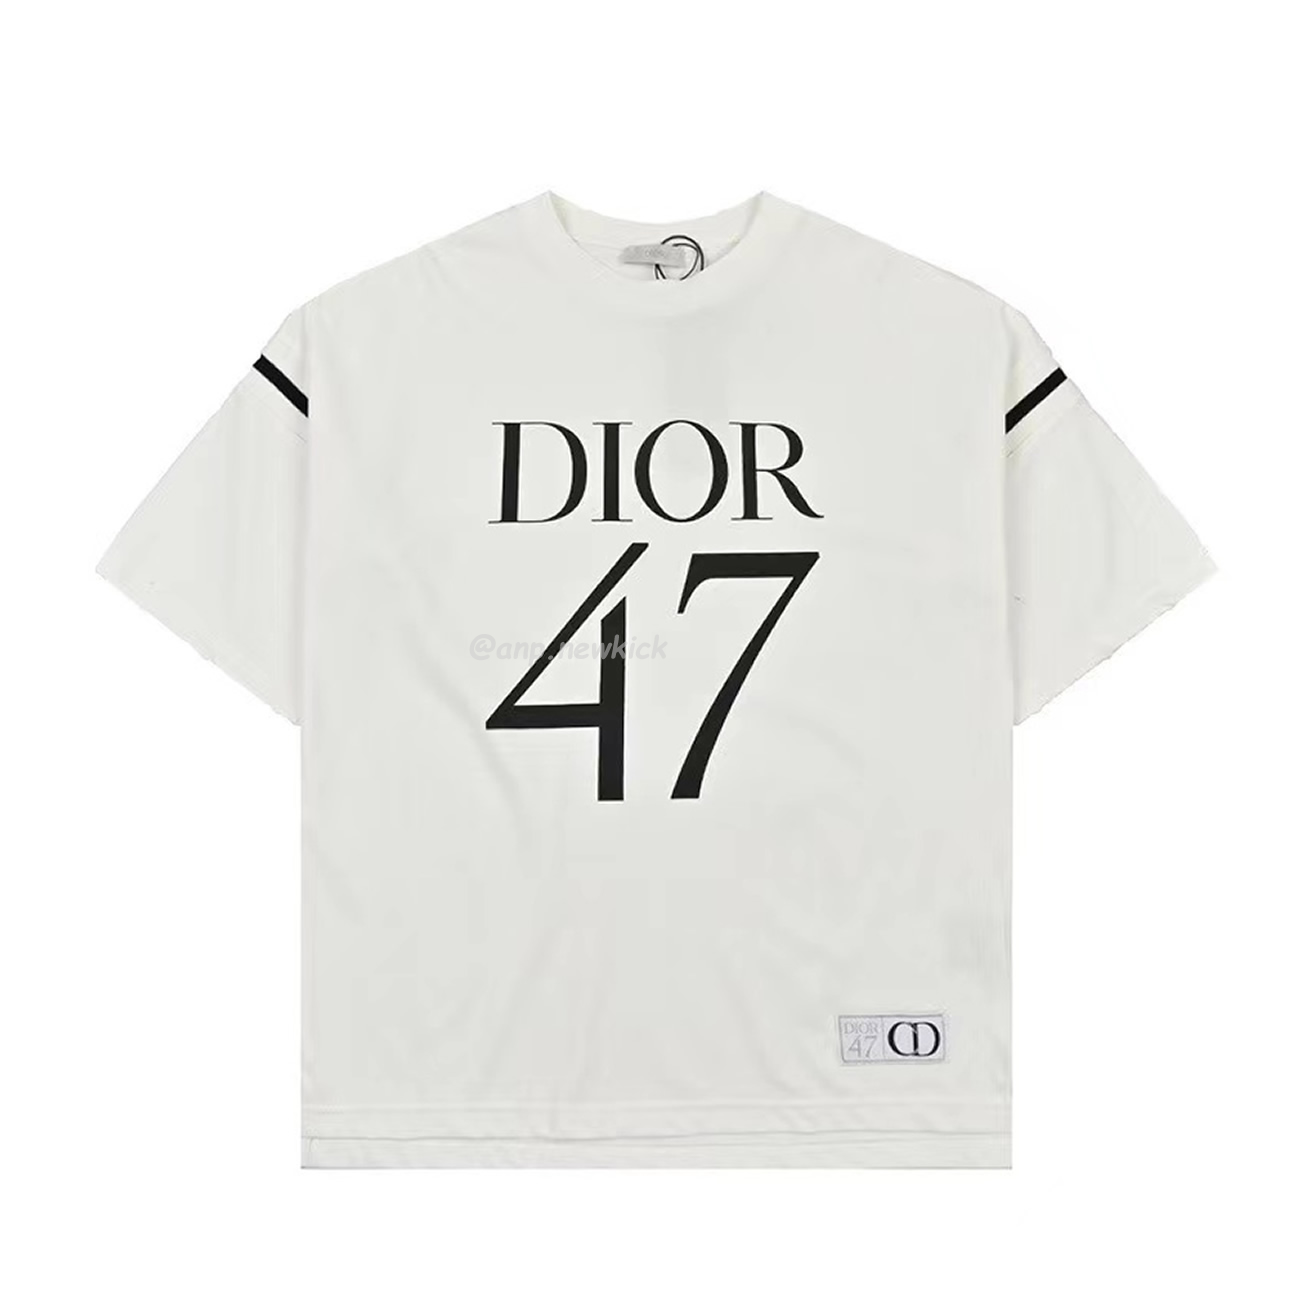 Dior Wide Body Bamboo Pure Cotton Plain Weave Fabric T Shirt White Navy (8) - newkick.org